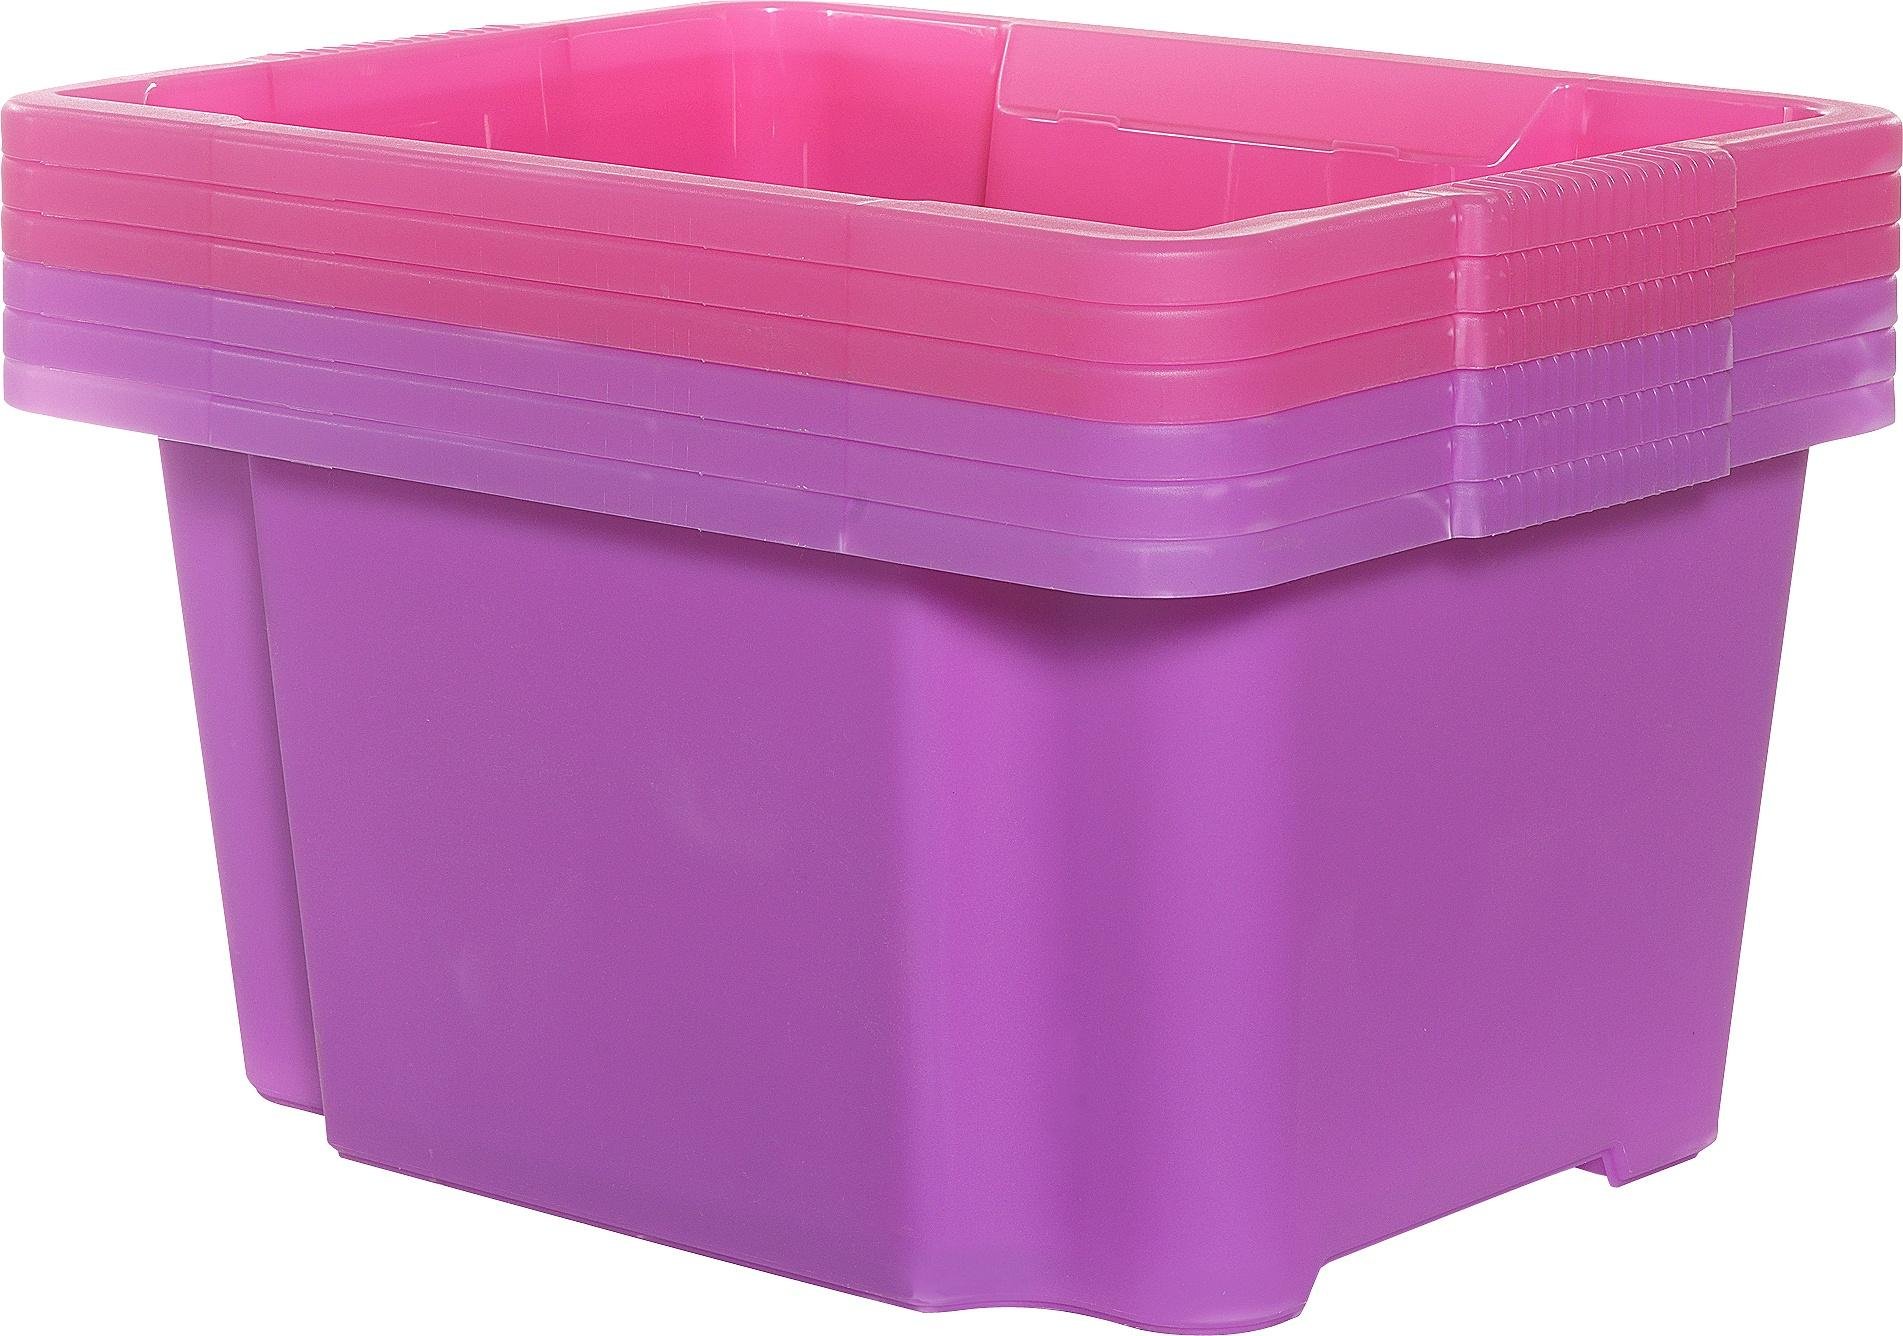 Argos Home Set of 6 Lilac & Pink Plastic Stack & Nest Boxes